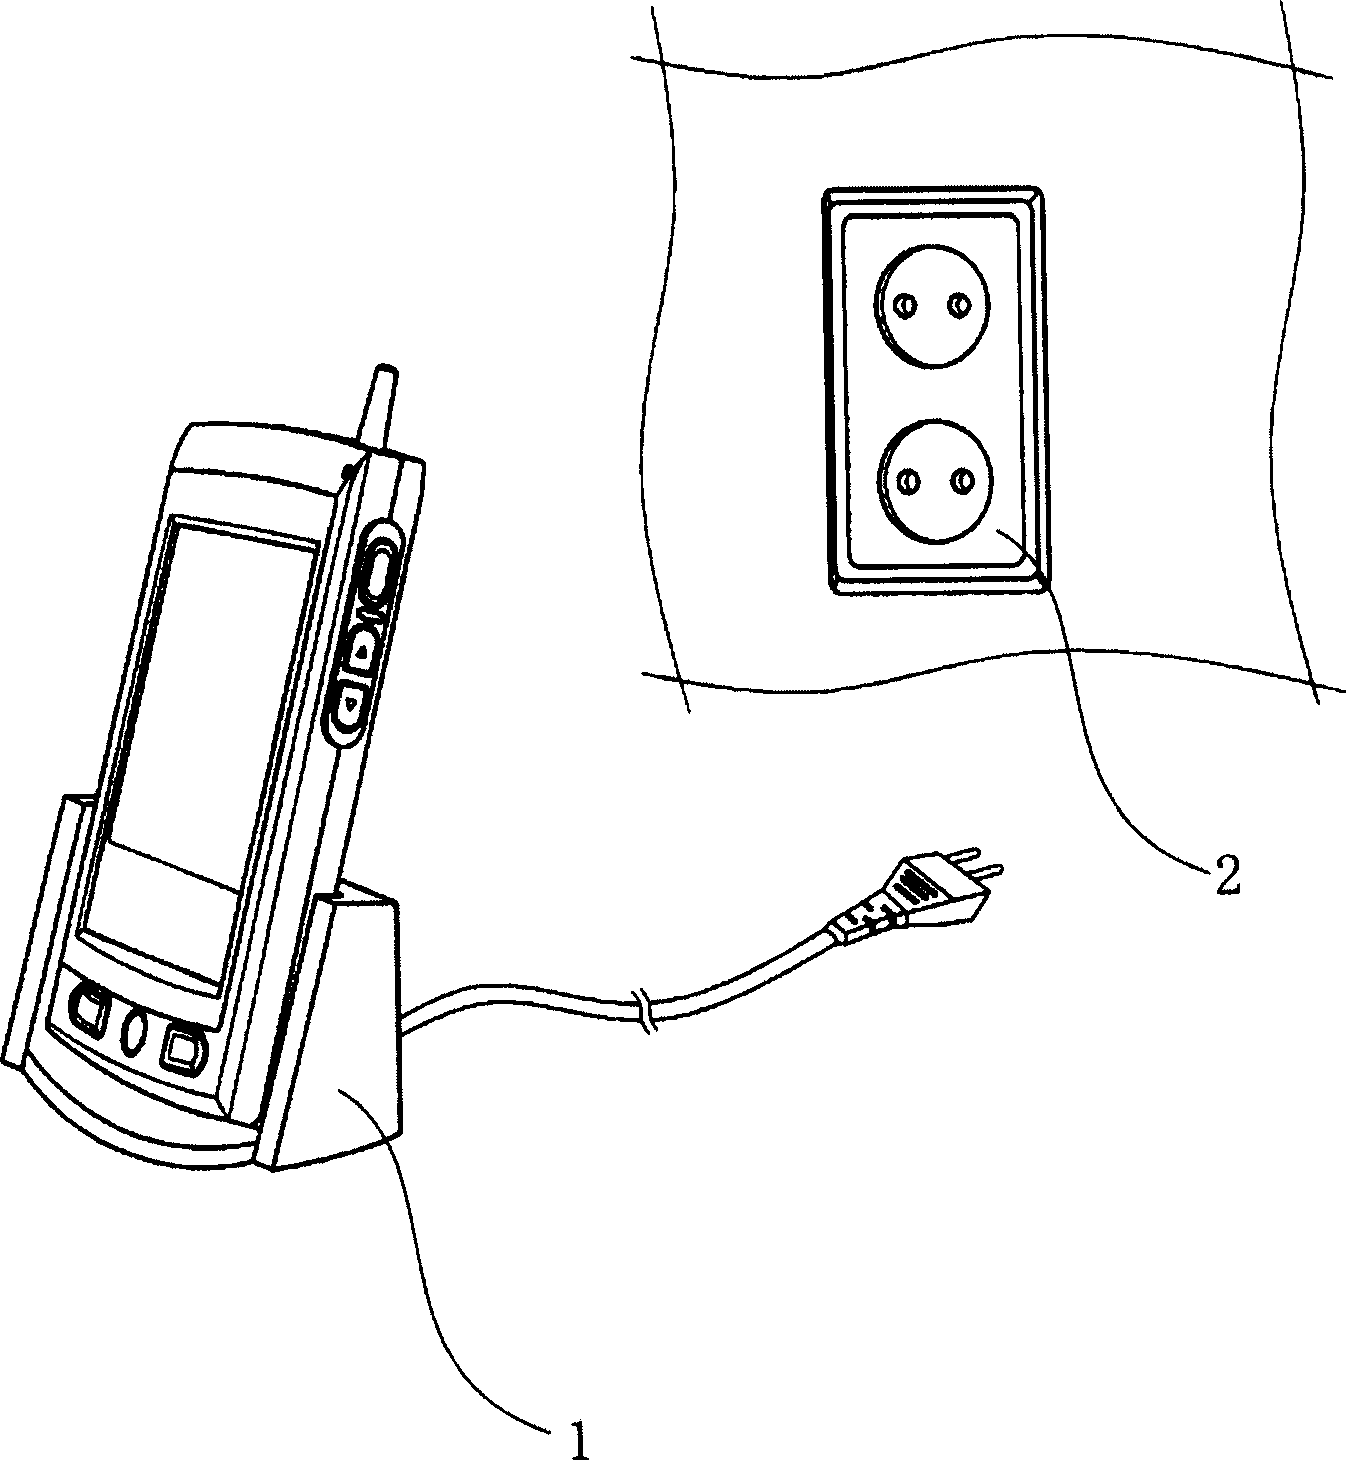 Charger of mobile device